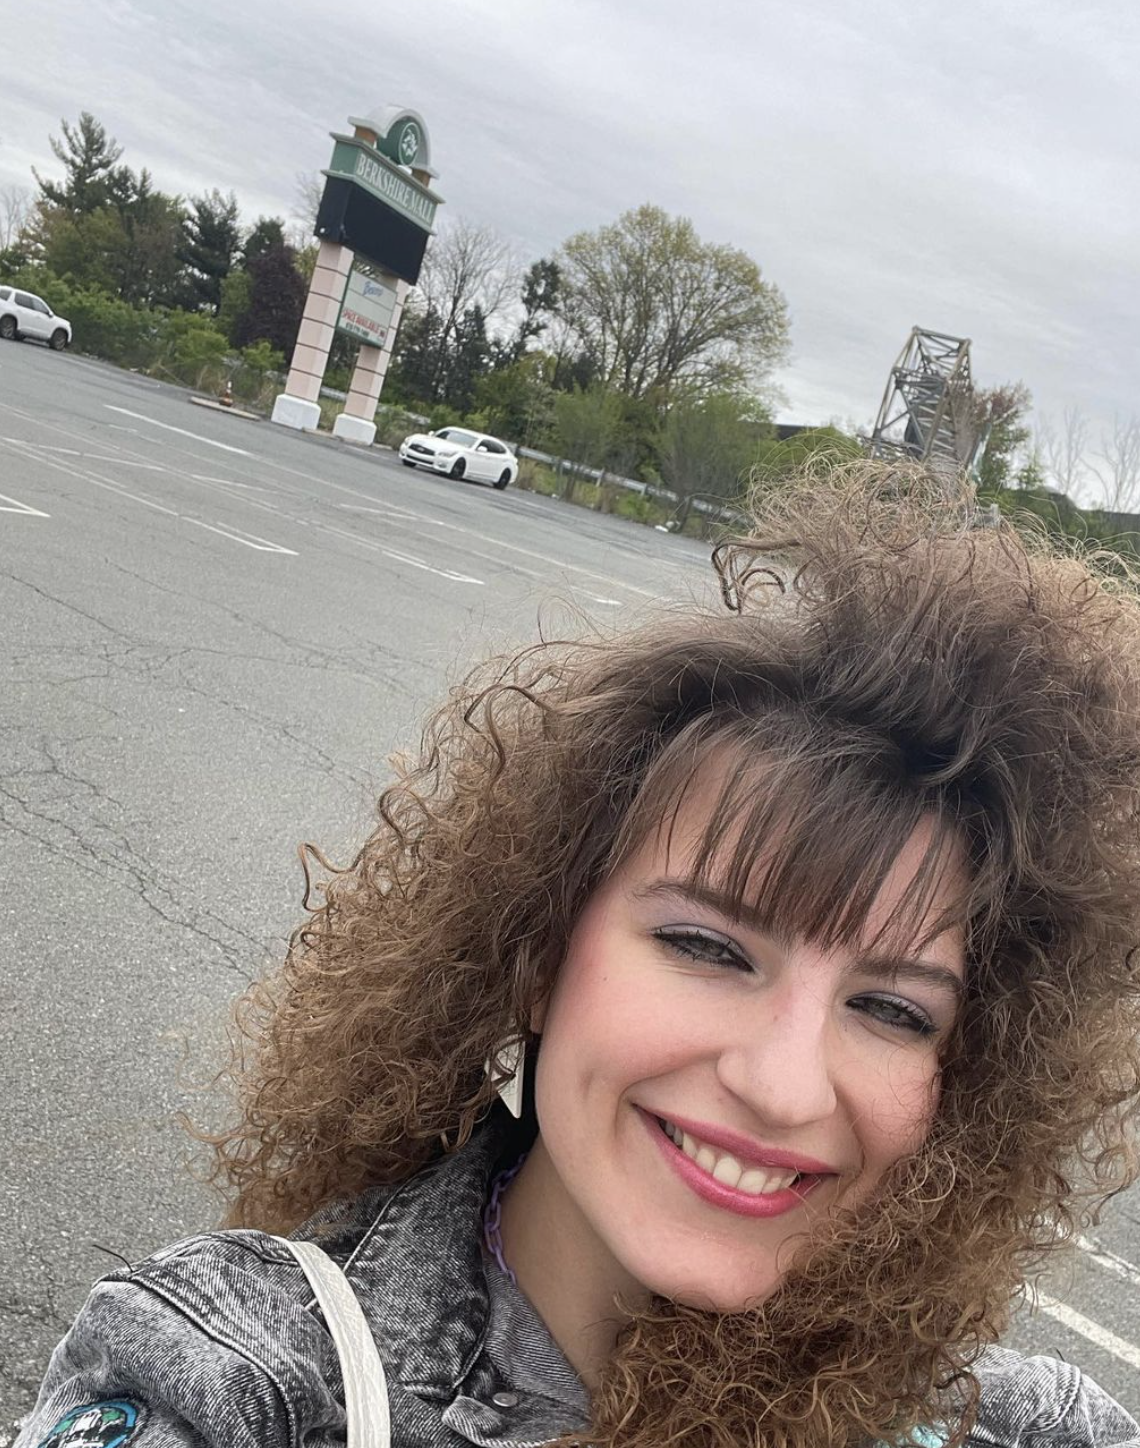 Woman smiling with curly hair and bangs in a nearly empty parking lot with trees and a white car in the background